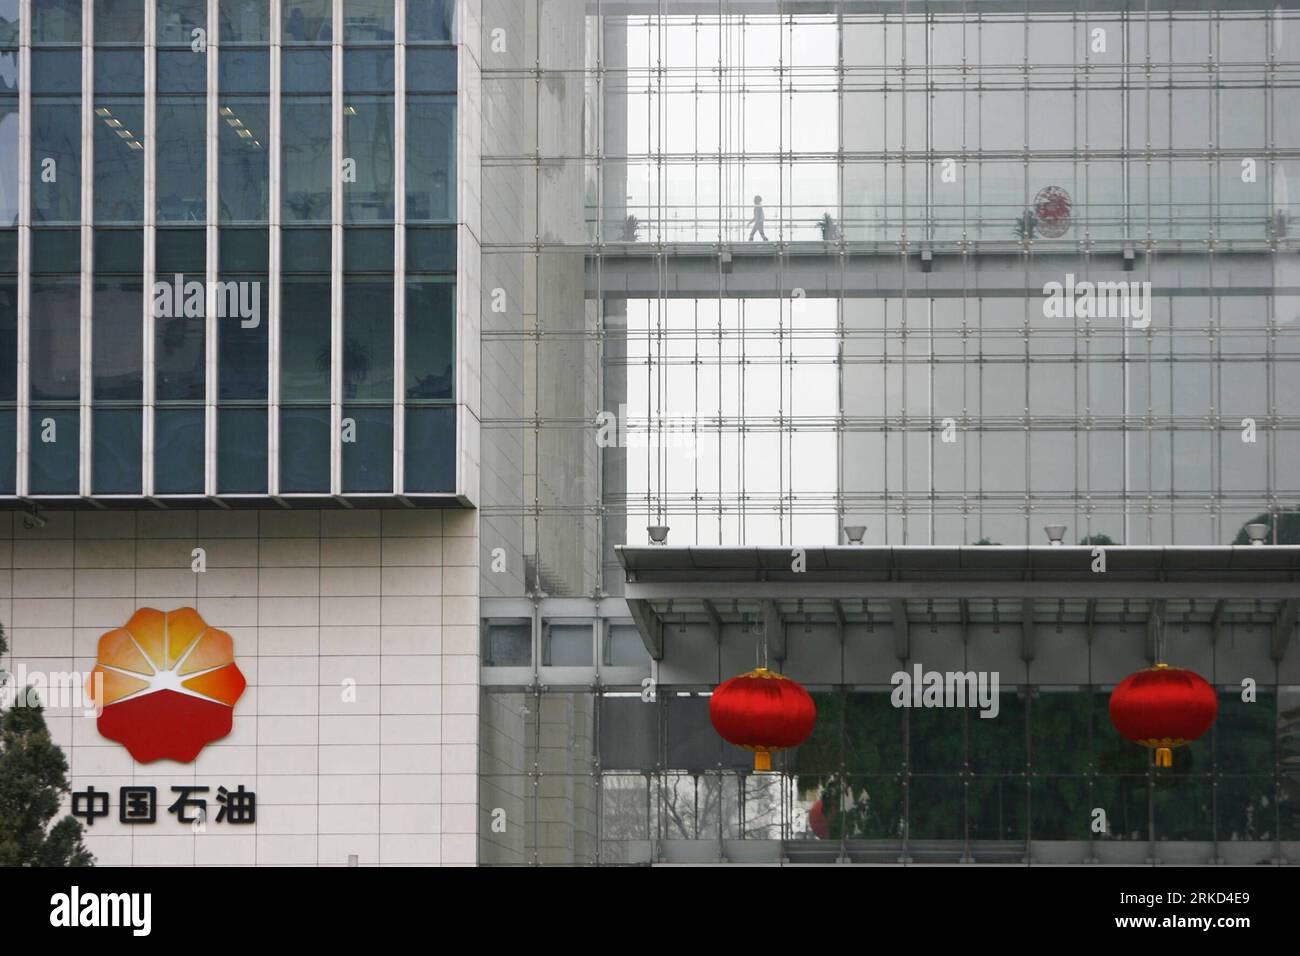 Bildnummer: 54858820  Datum: 27.01.2011  Copyright: imago/Xinhua BEIJING, Jan. 27, 2011 (Xinhua) -- Photo taken on Jan. 27, 2011 shows the headquarters of China National Petroleum Corporation (CNPC) in Beijing, capital of China. According to the 2010 PFC Energy 50 list issued on January 2011, ExxonMobil, with market capitalization of Dollar 368.7 billion, replaced CNPC as the world s largest listed energy firms. The latter s market value fell 14%, closing the year of 2010 in second place. (Xinhua/Cui Xinyu) (zgp) CHINA-BEIJING-PETROCHINA-2010 ENERGY 50-SECOND LARGEST (CN) PUBLICATIONxNOTxINxCH Stock Photo